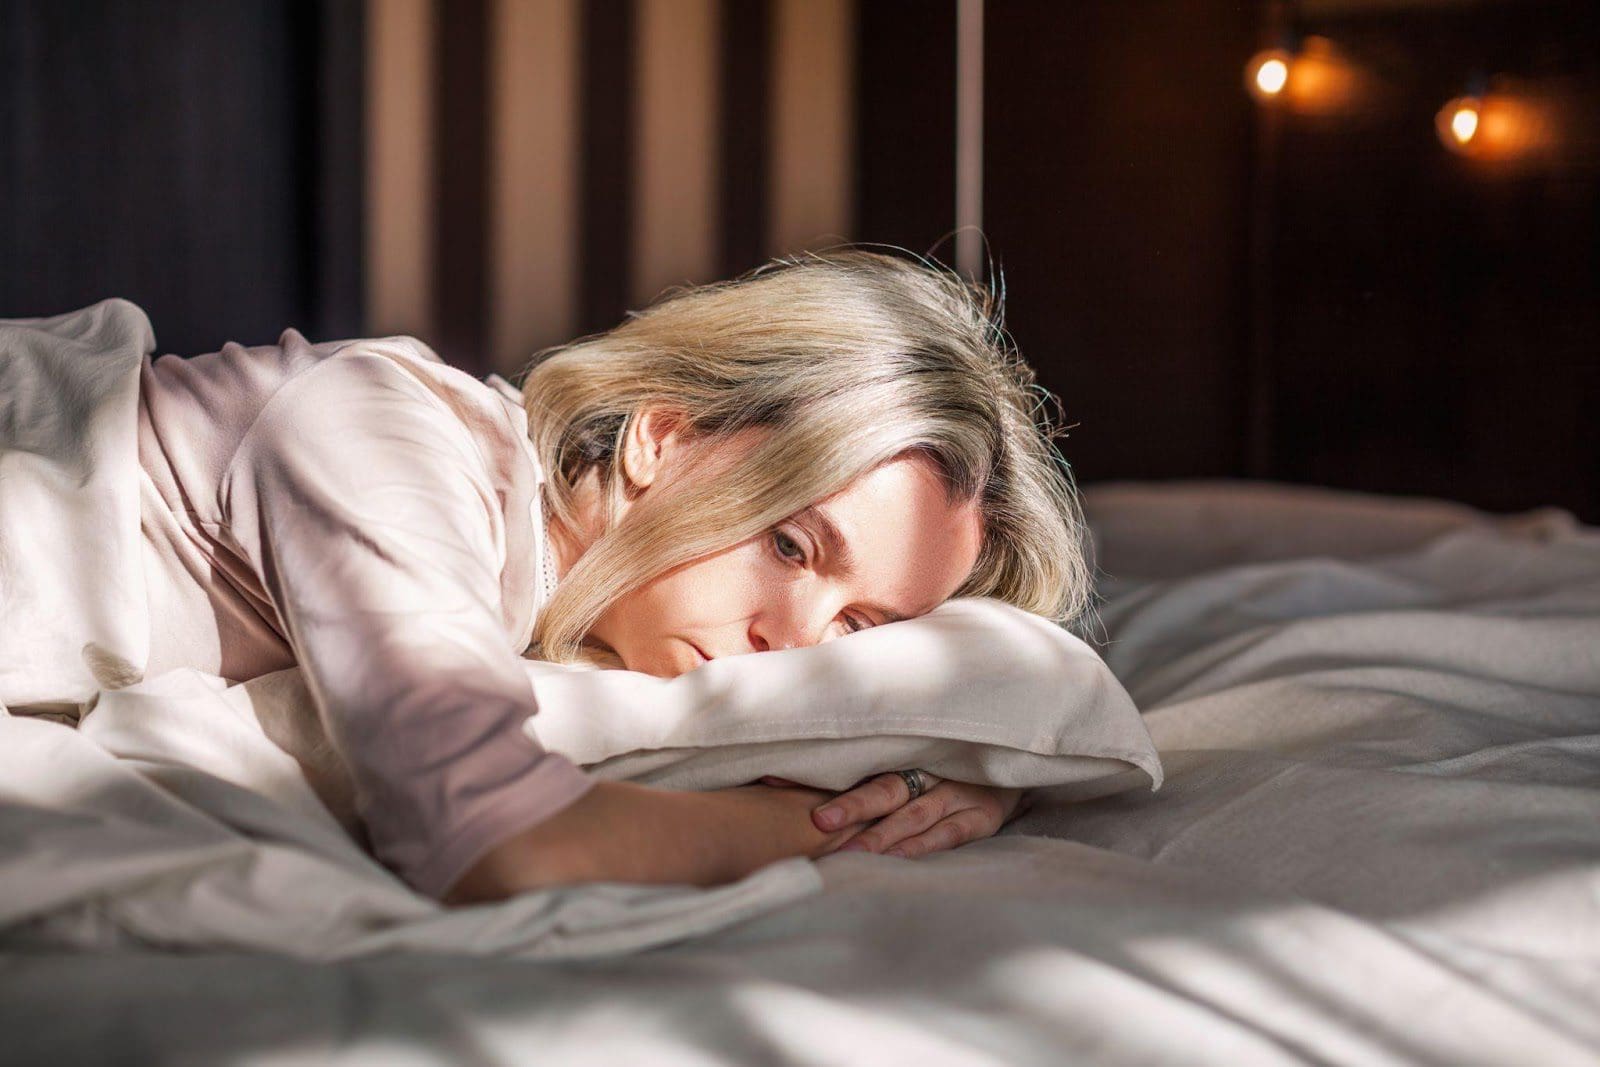 Woman with insomnia lying on her stomach in bed.